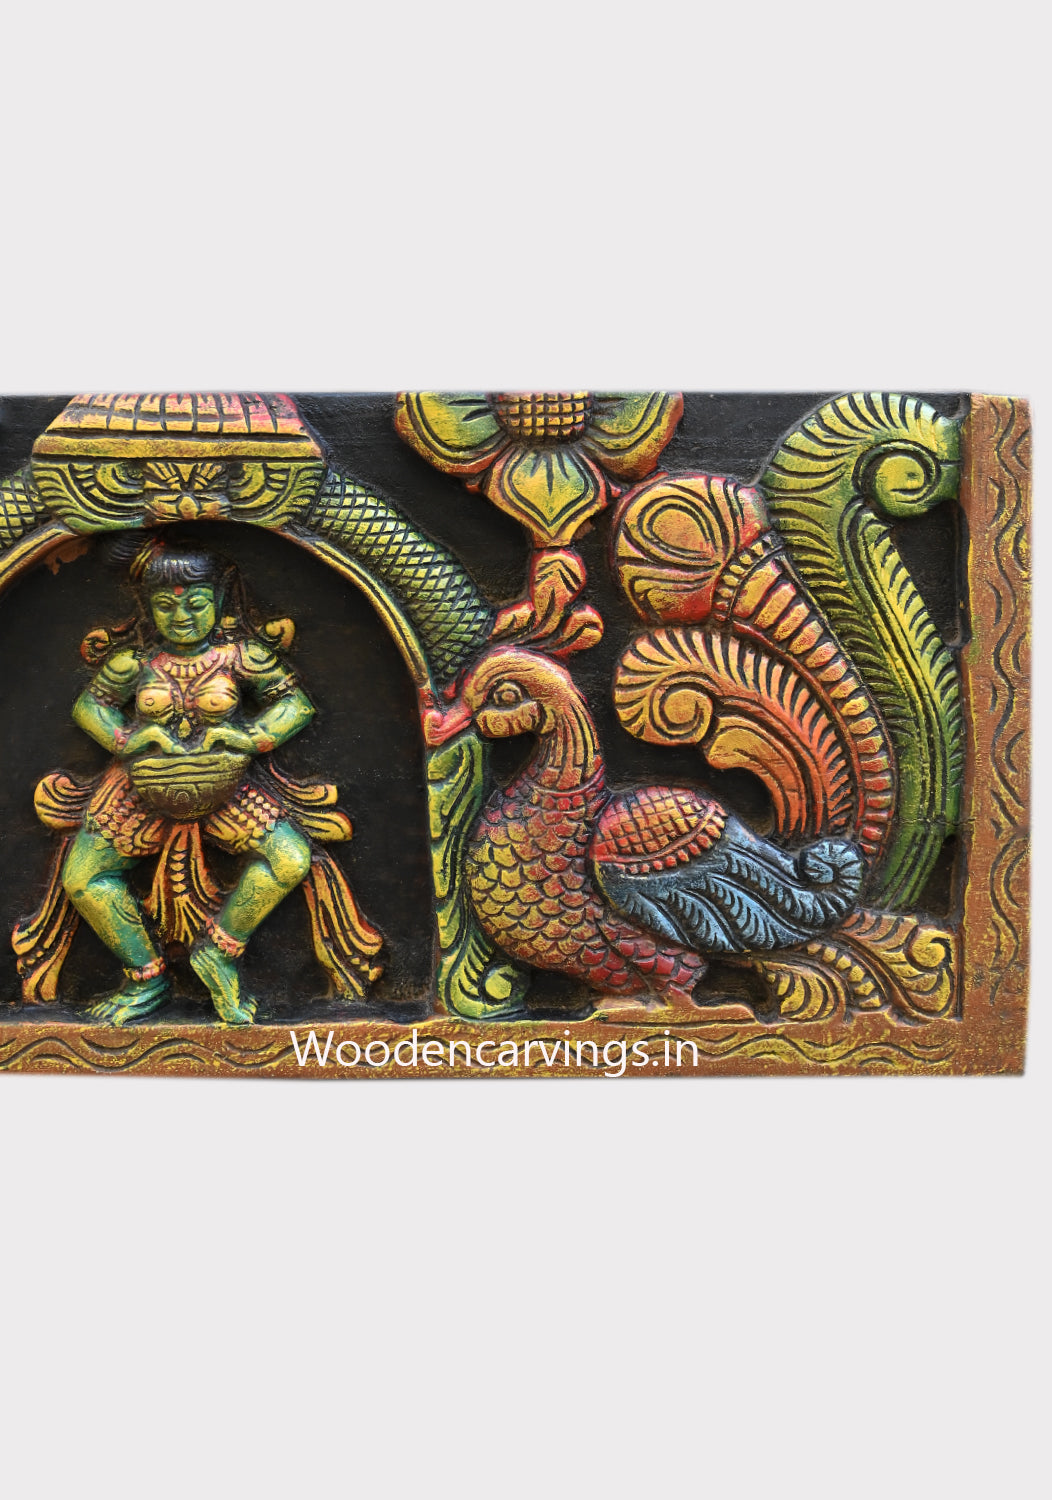 Wooden Horizontal Musical Lord Ganesh With Dancing Apsaras Multicoloured Wooden Wall Panel 72"